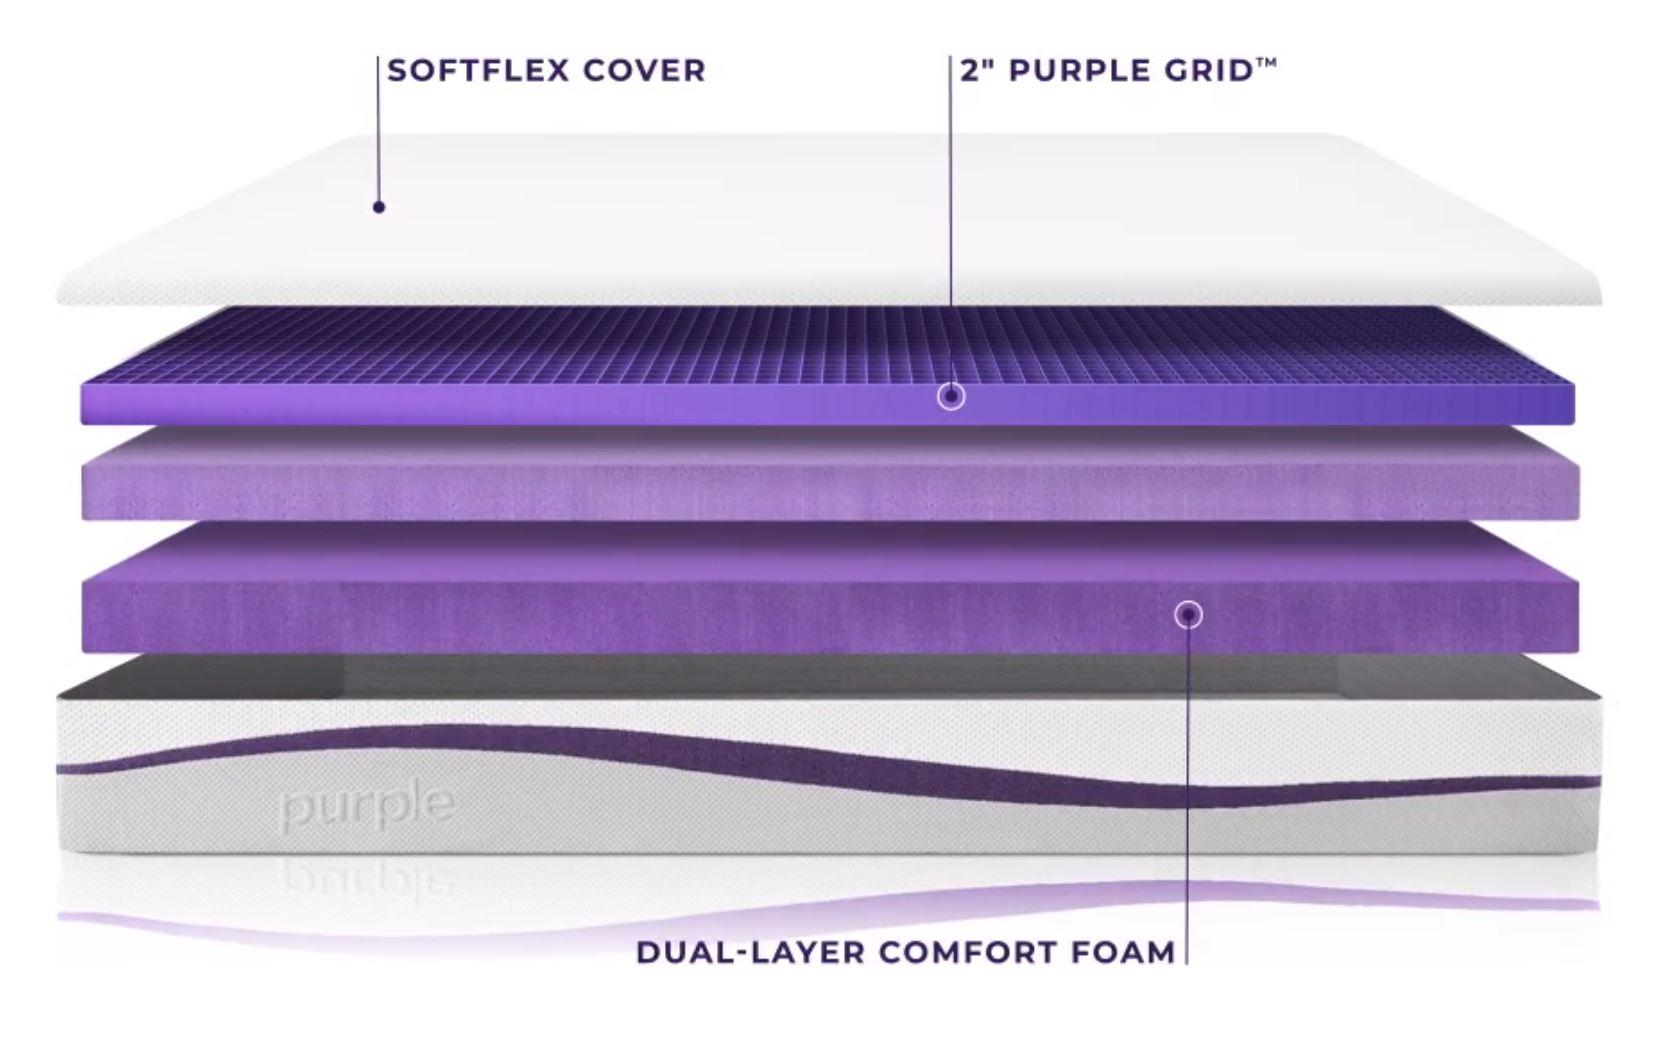 purple mattress dimensions and weight